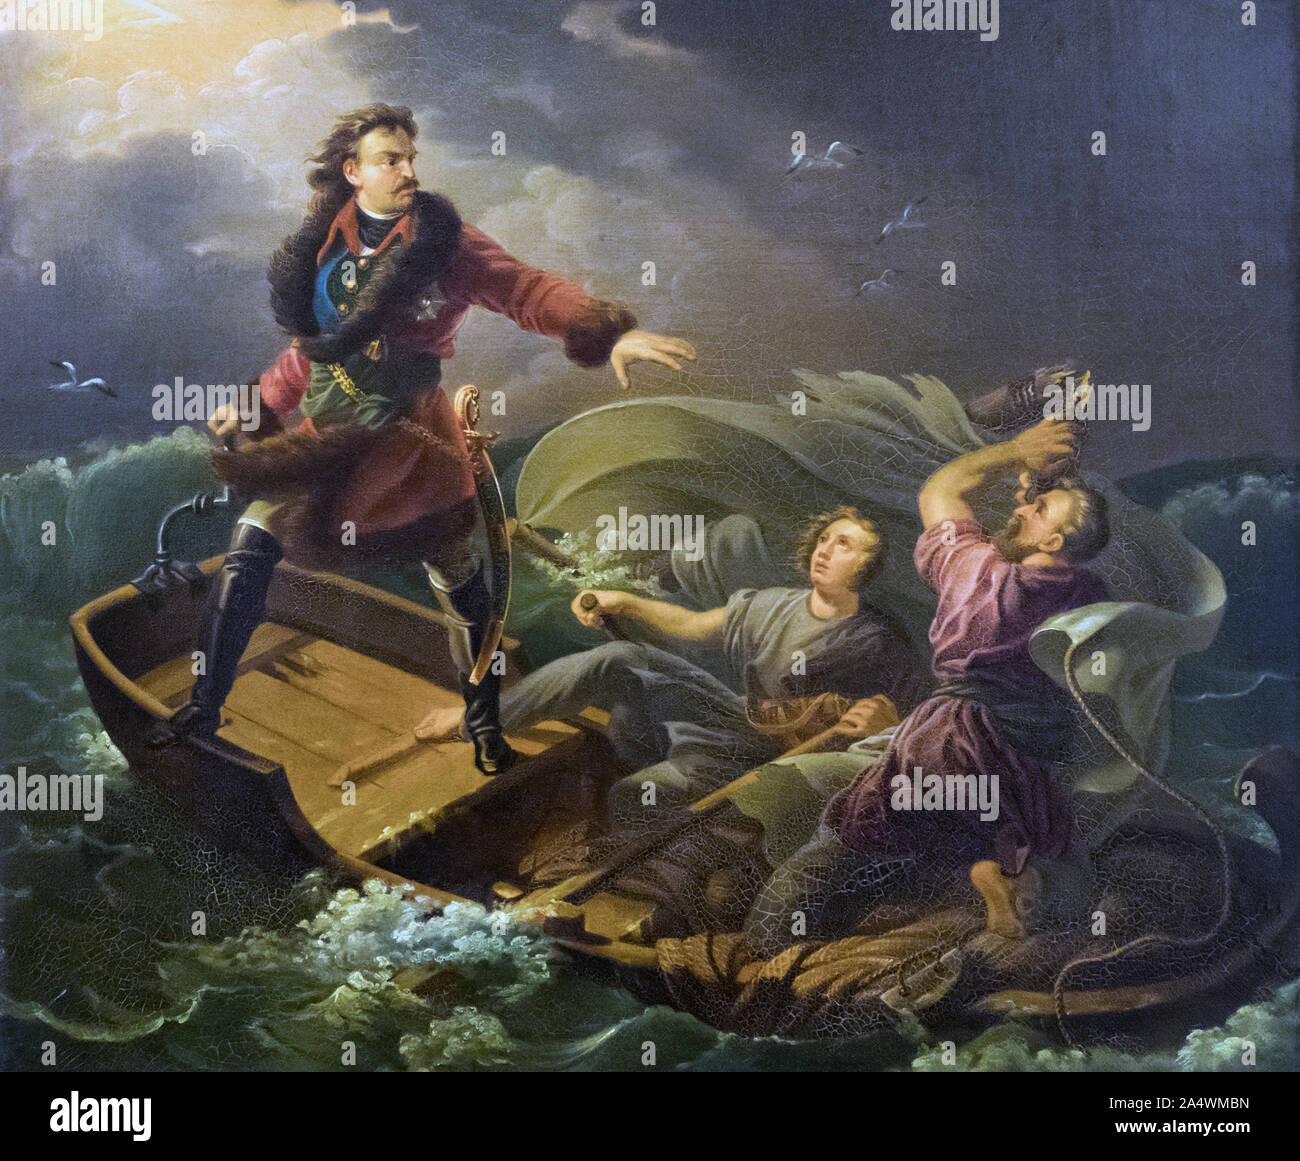 Feat of Peter the Great in the Storm by Alexander von Kotzebue. Smaller copy version of Peter the Great Saving Drowning People in the Storm on Lake La Stock Photo